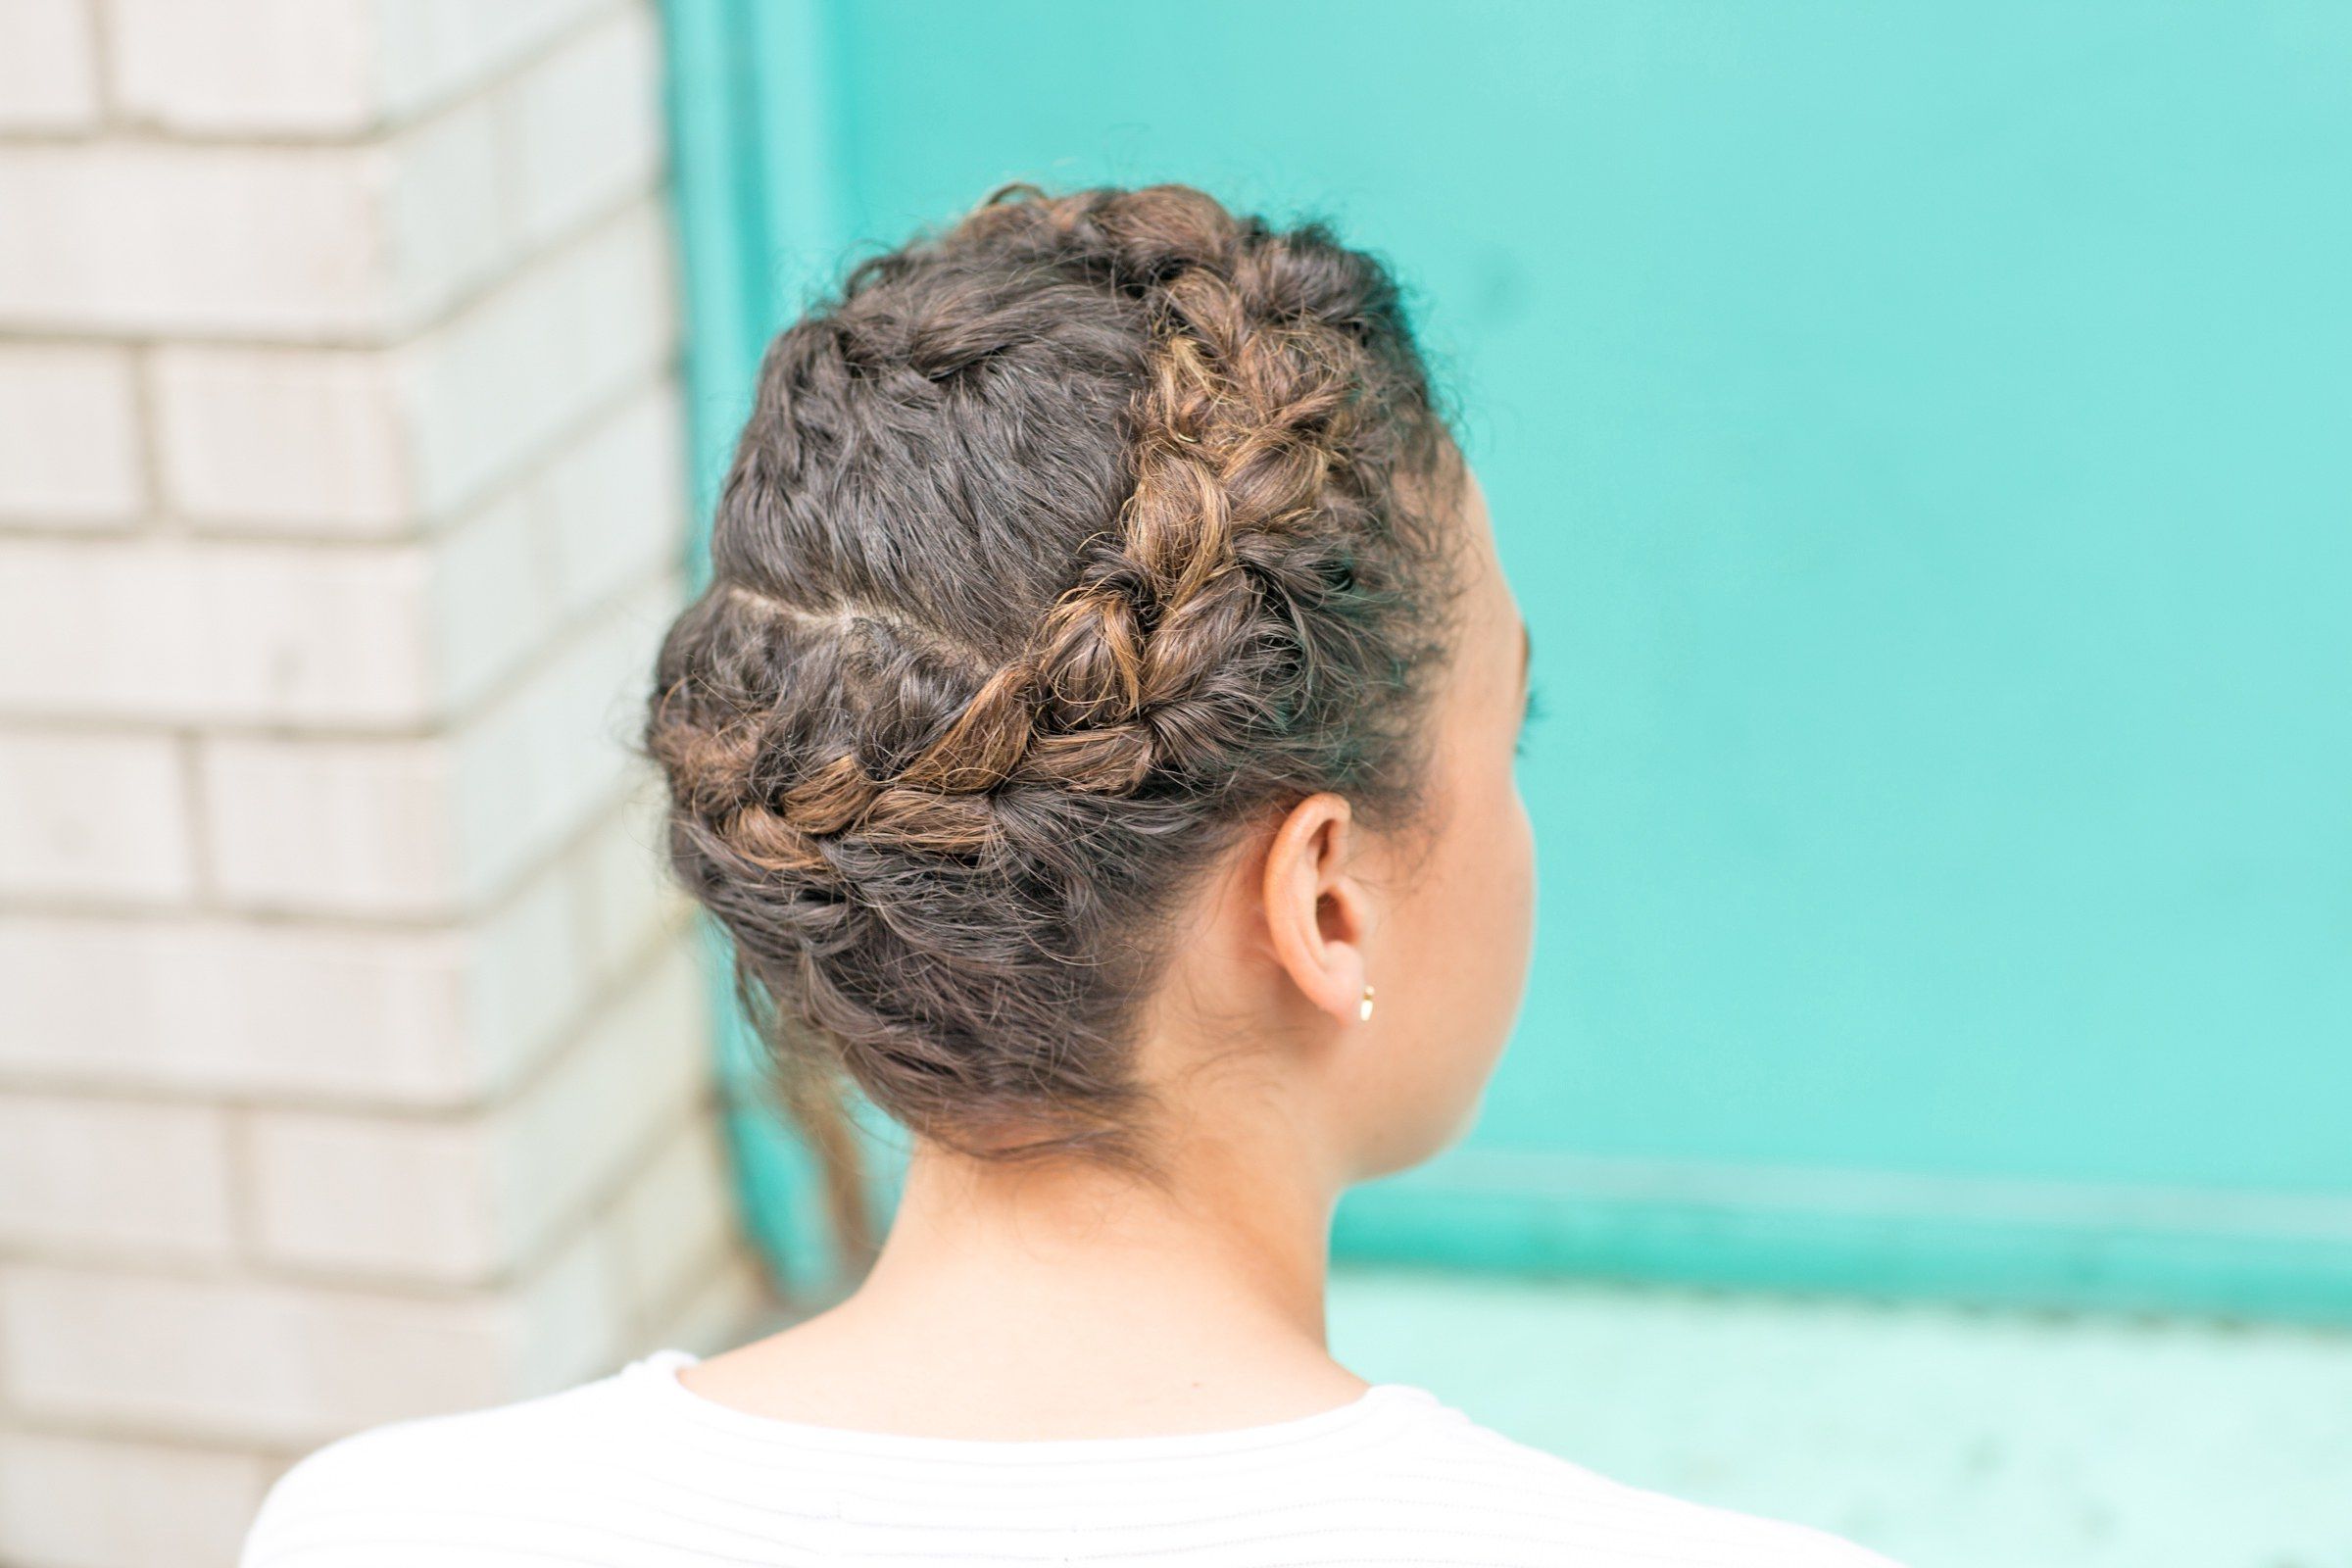 The Best Braided Hairstyles For Fine Hair And Curly Hair Throughout Newest Secured Wrapping Braided Hairstyles (View 16 of 20)